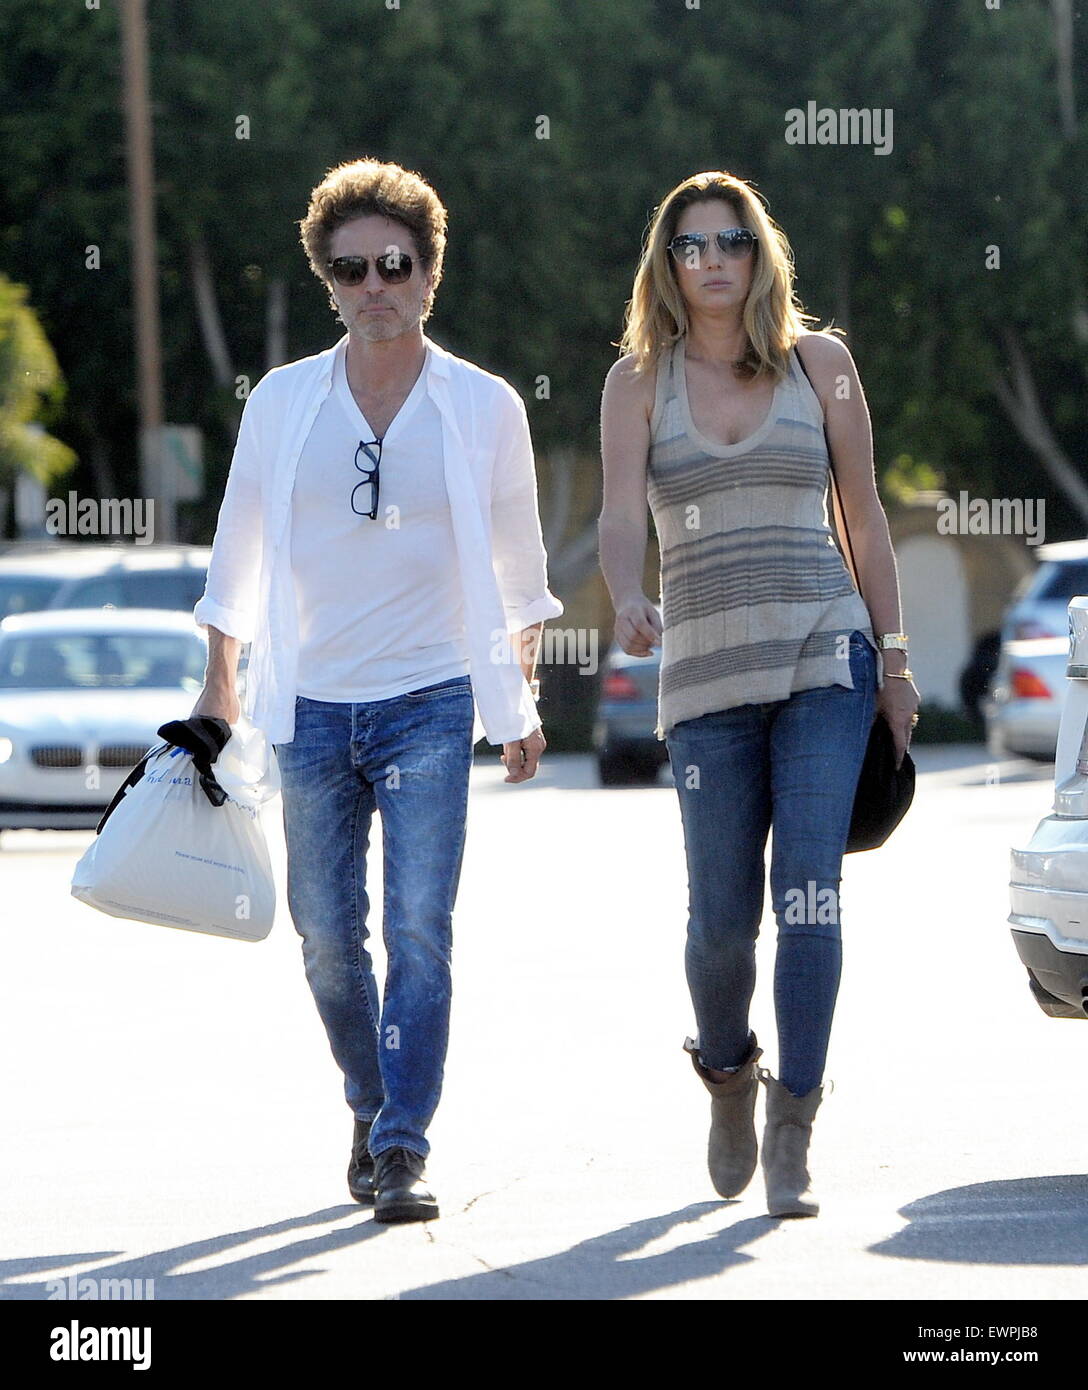 Model Daisy Fuentes flaunts her famous curves at the age of 48 while out shopping with her new boyfriend singer Richard Marx. The new couple were seen holding hands while shopping at Urban Outfitters in Studio City. Daisy also seen checking out her new yellow diamond ring on her wedding ring finger. Richard who recently split from his wife of 25 years last year has been linked to daisy since then.  Featuring: Daisy Fuentes, Richard Marx Where: Studio City, California, United States When: 28 Apr 2015 C Stock Photo